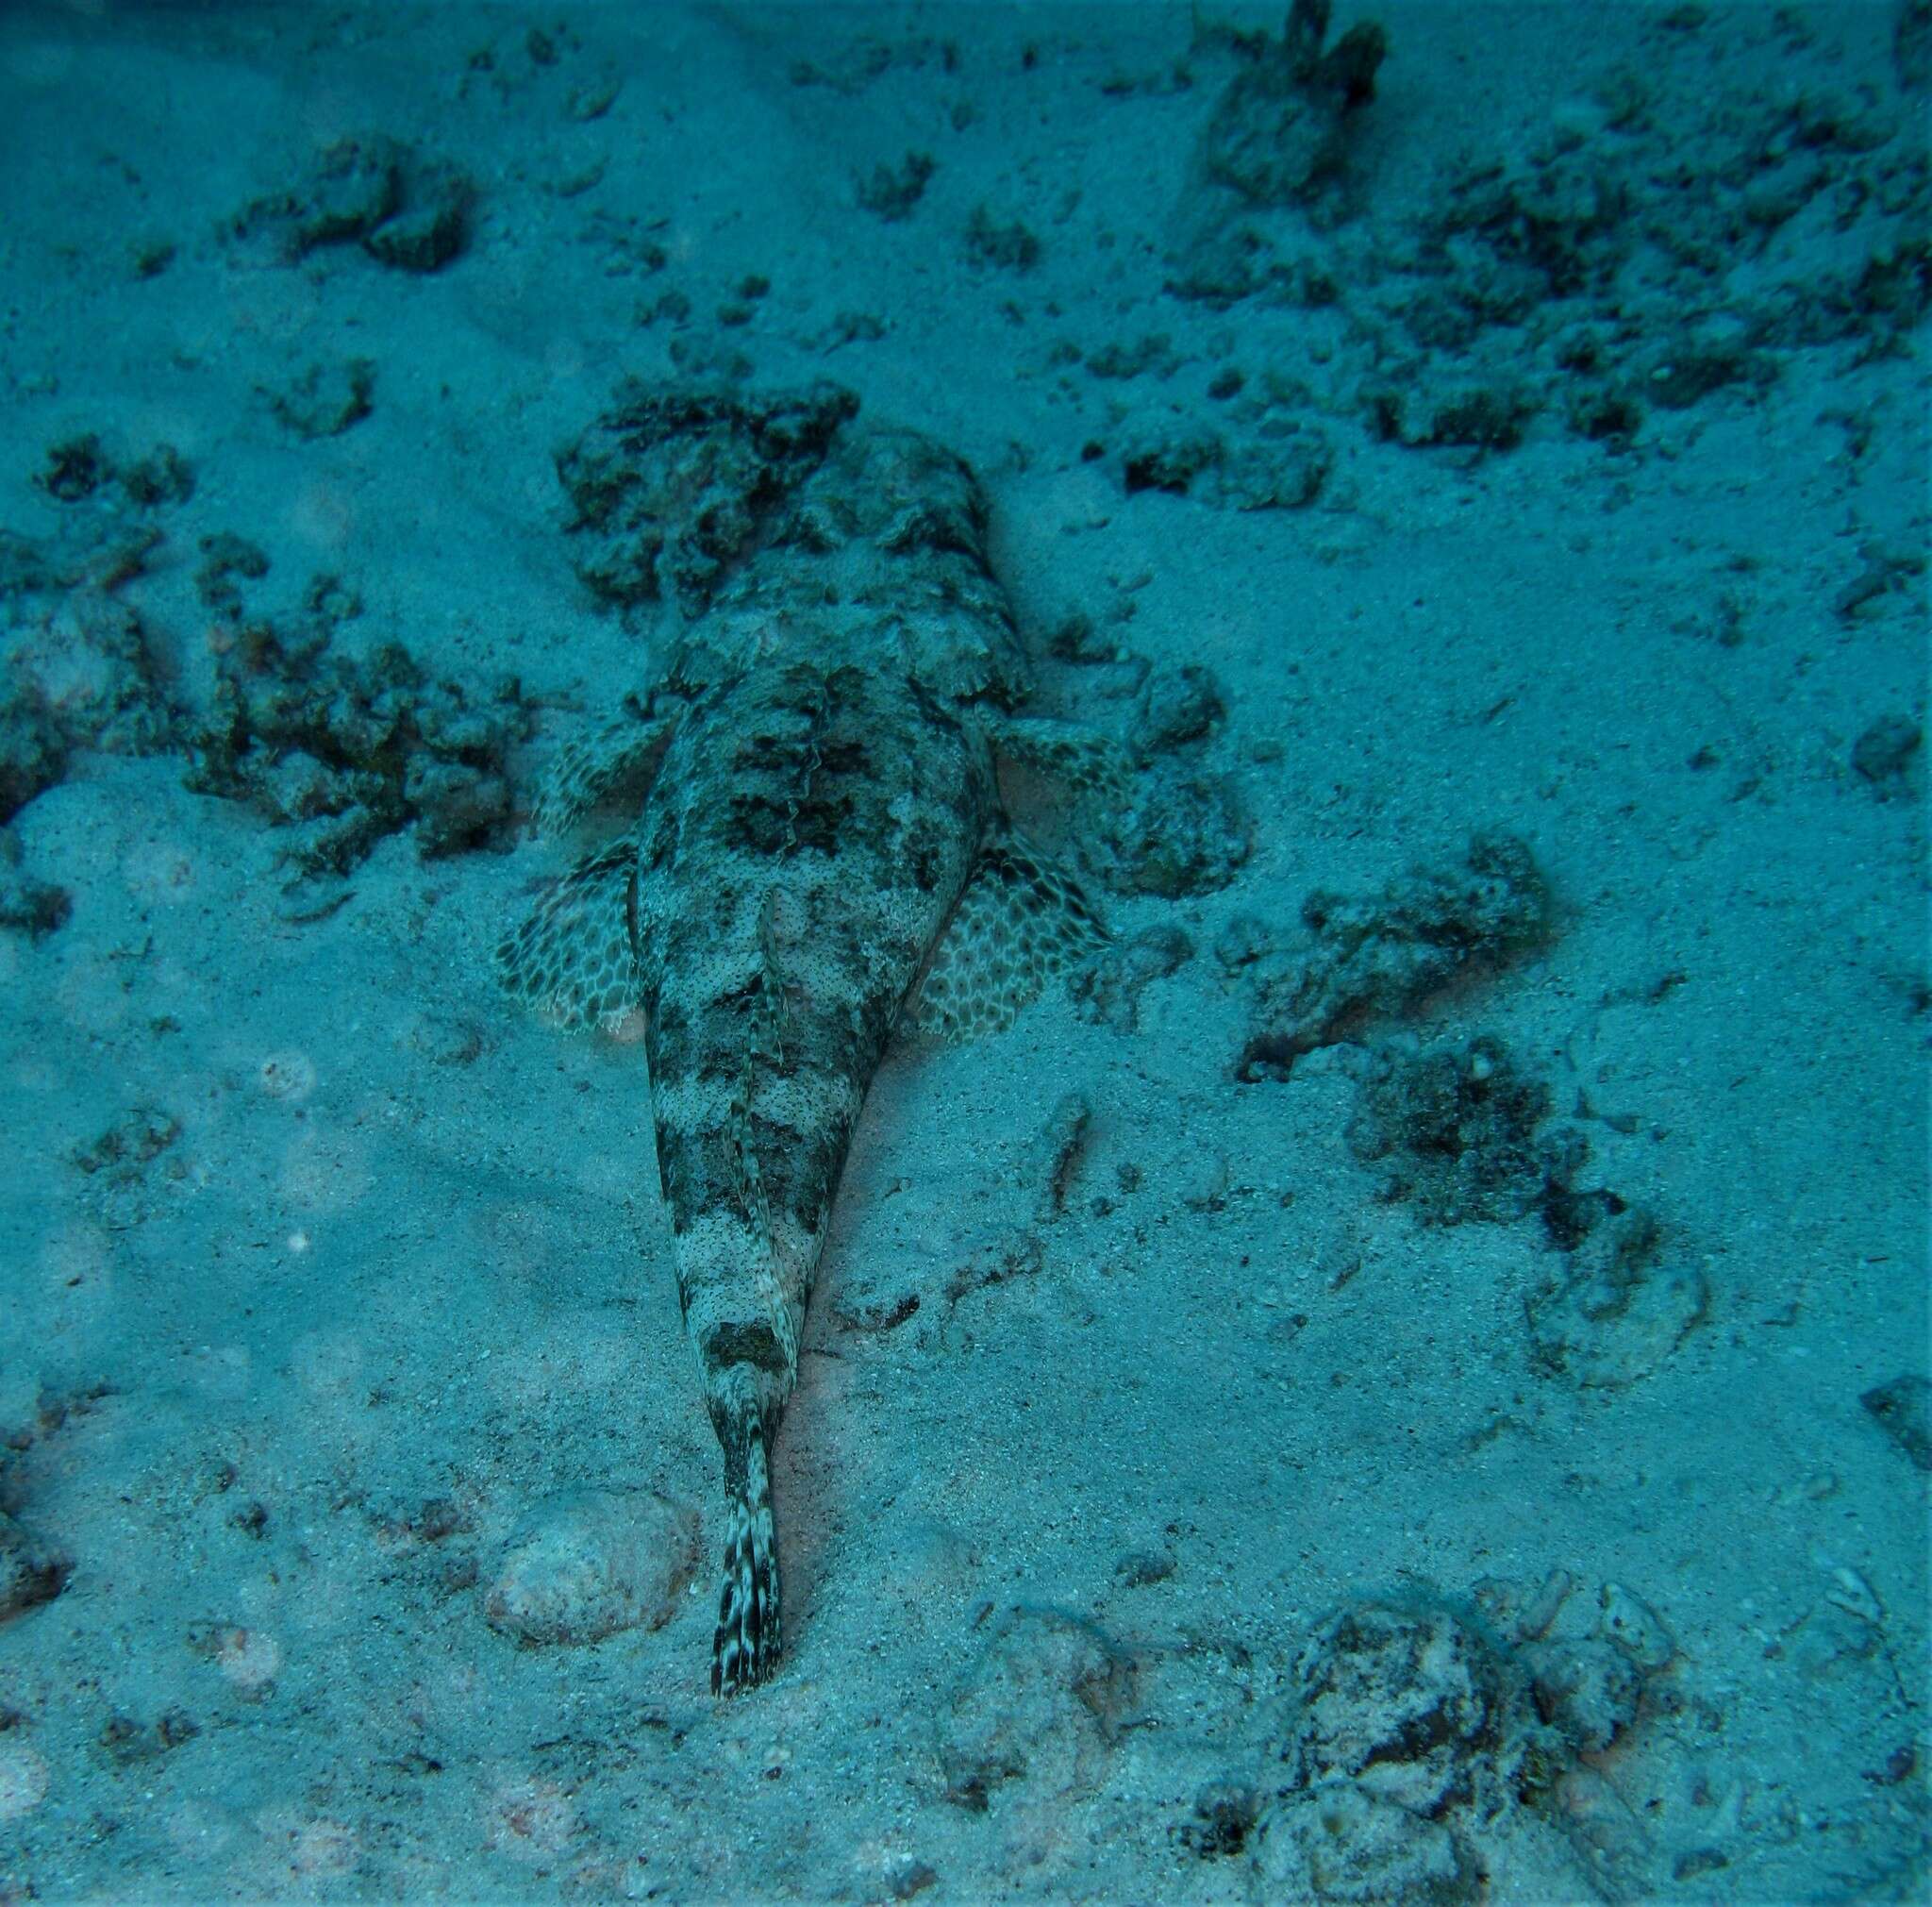 Image of Papilloculiceps